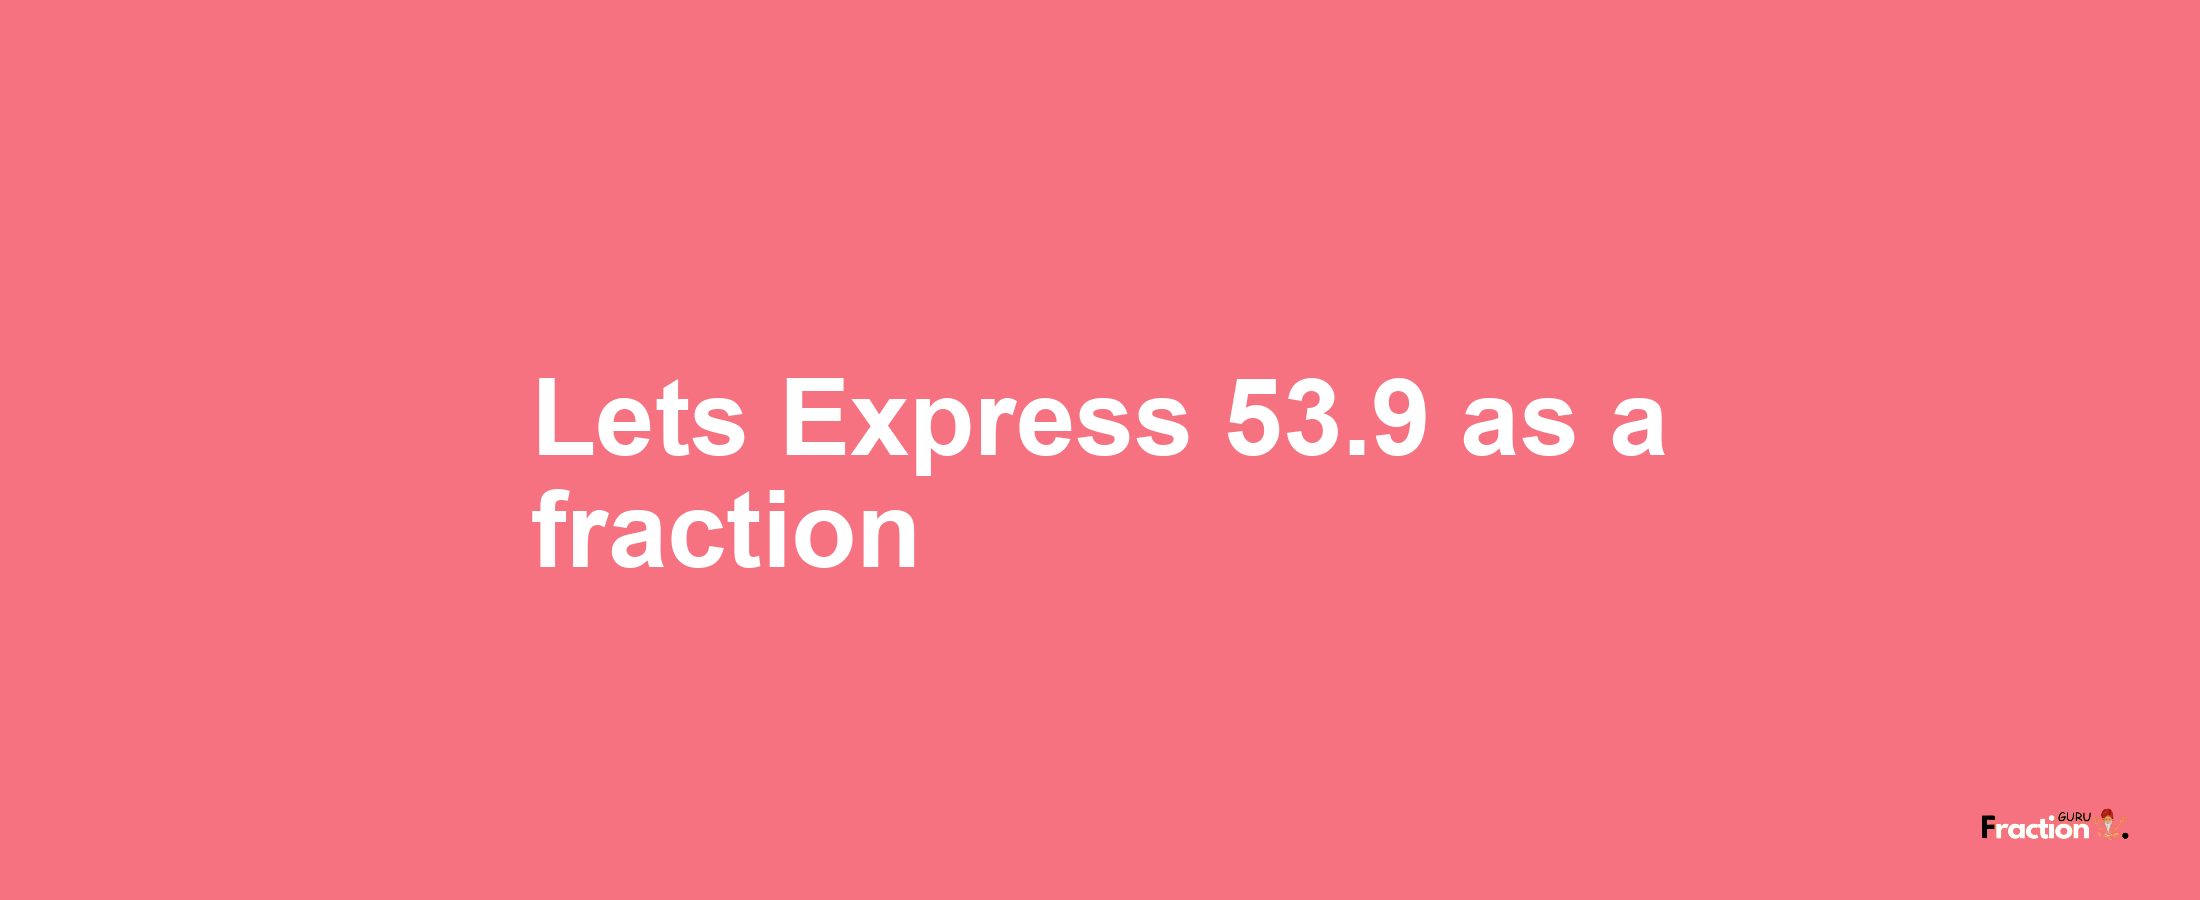 Lets Express 53.9 as afraction